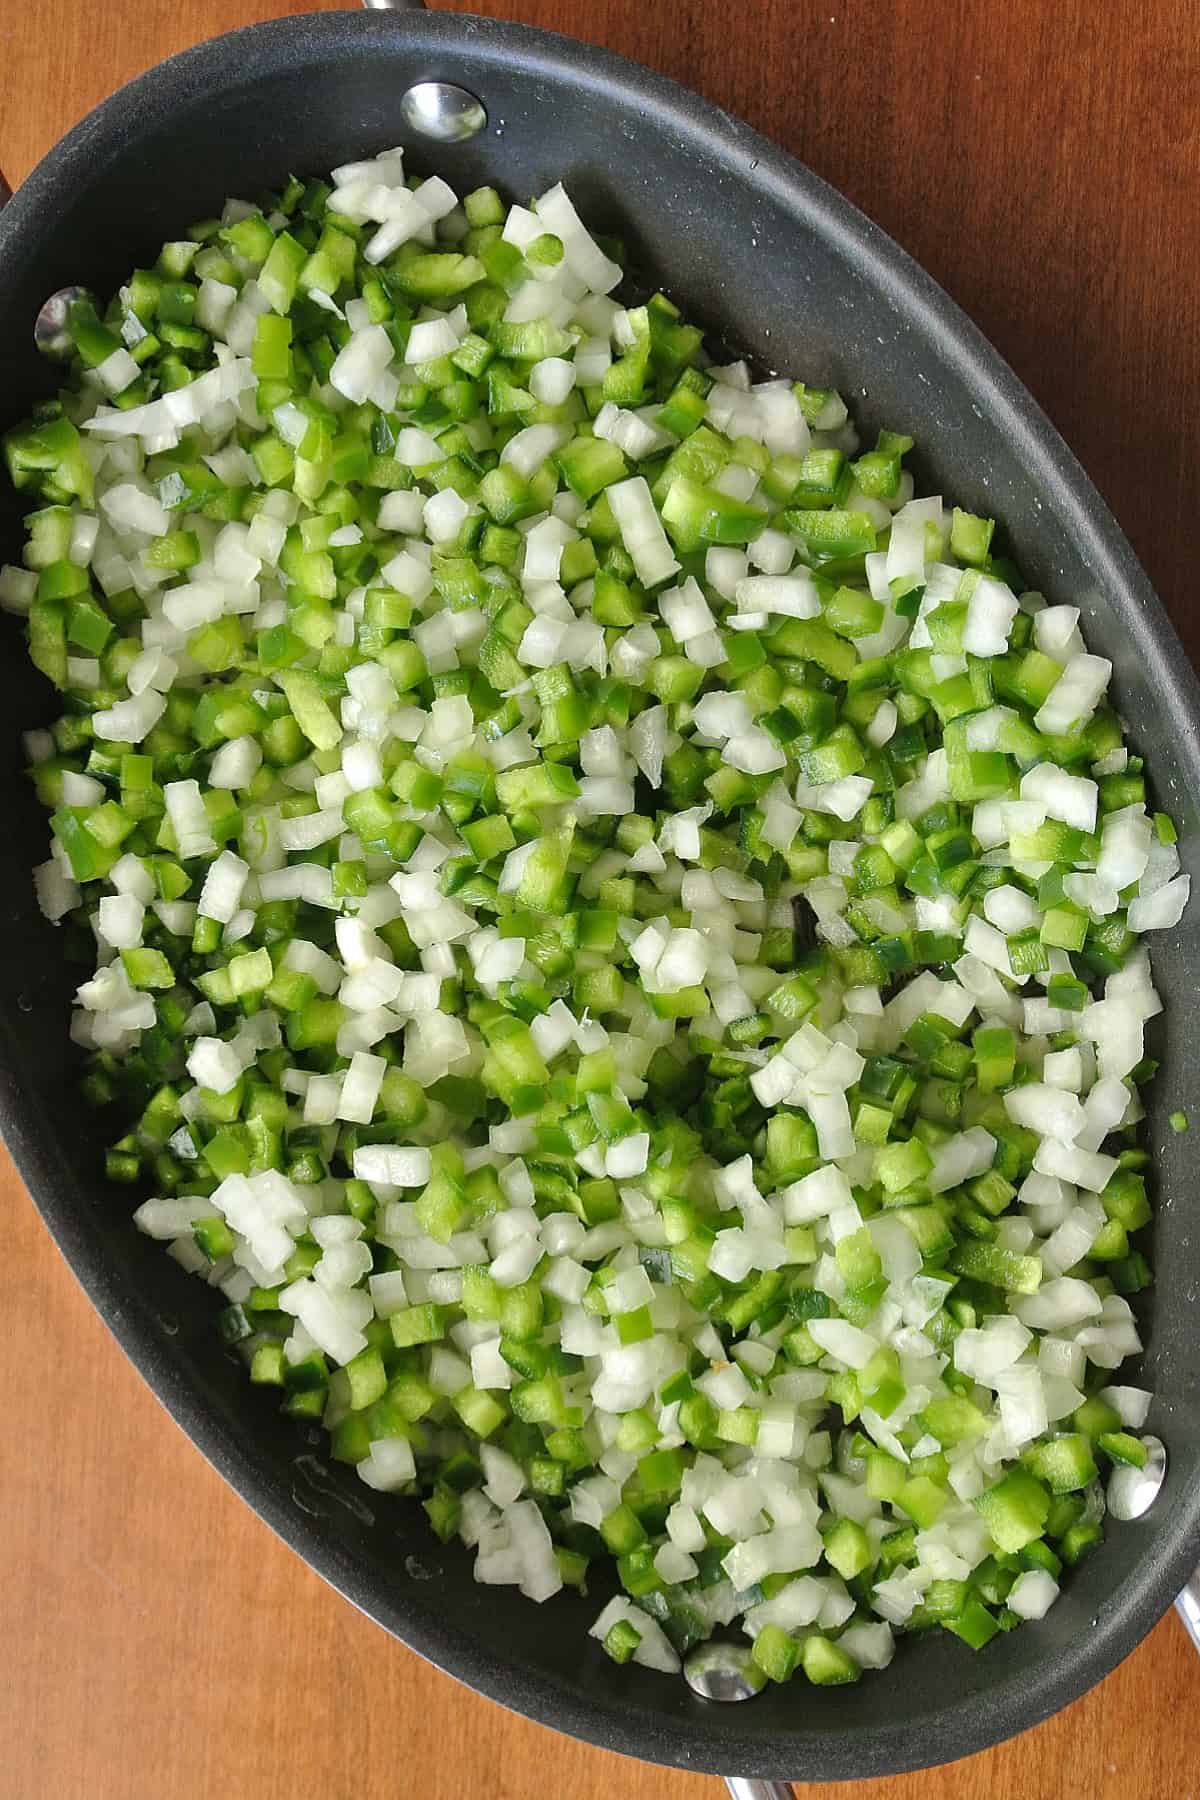 Overhead view of small diced white onions and green bell peppers are in an oblong frying pan and just starting to saute.